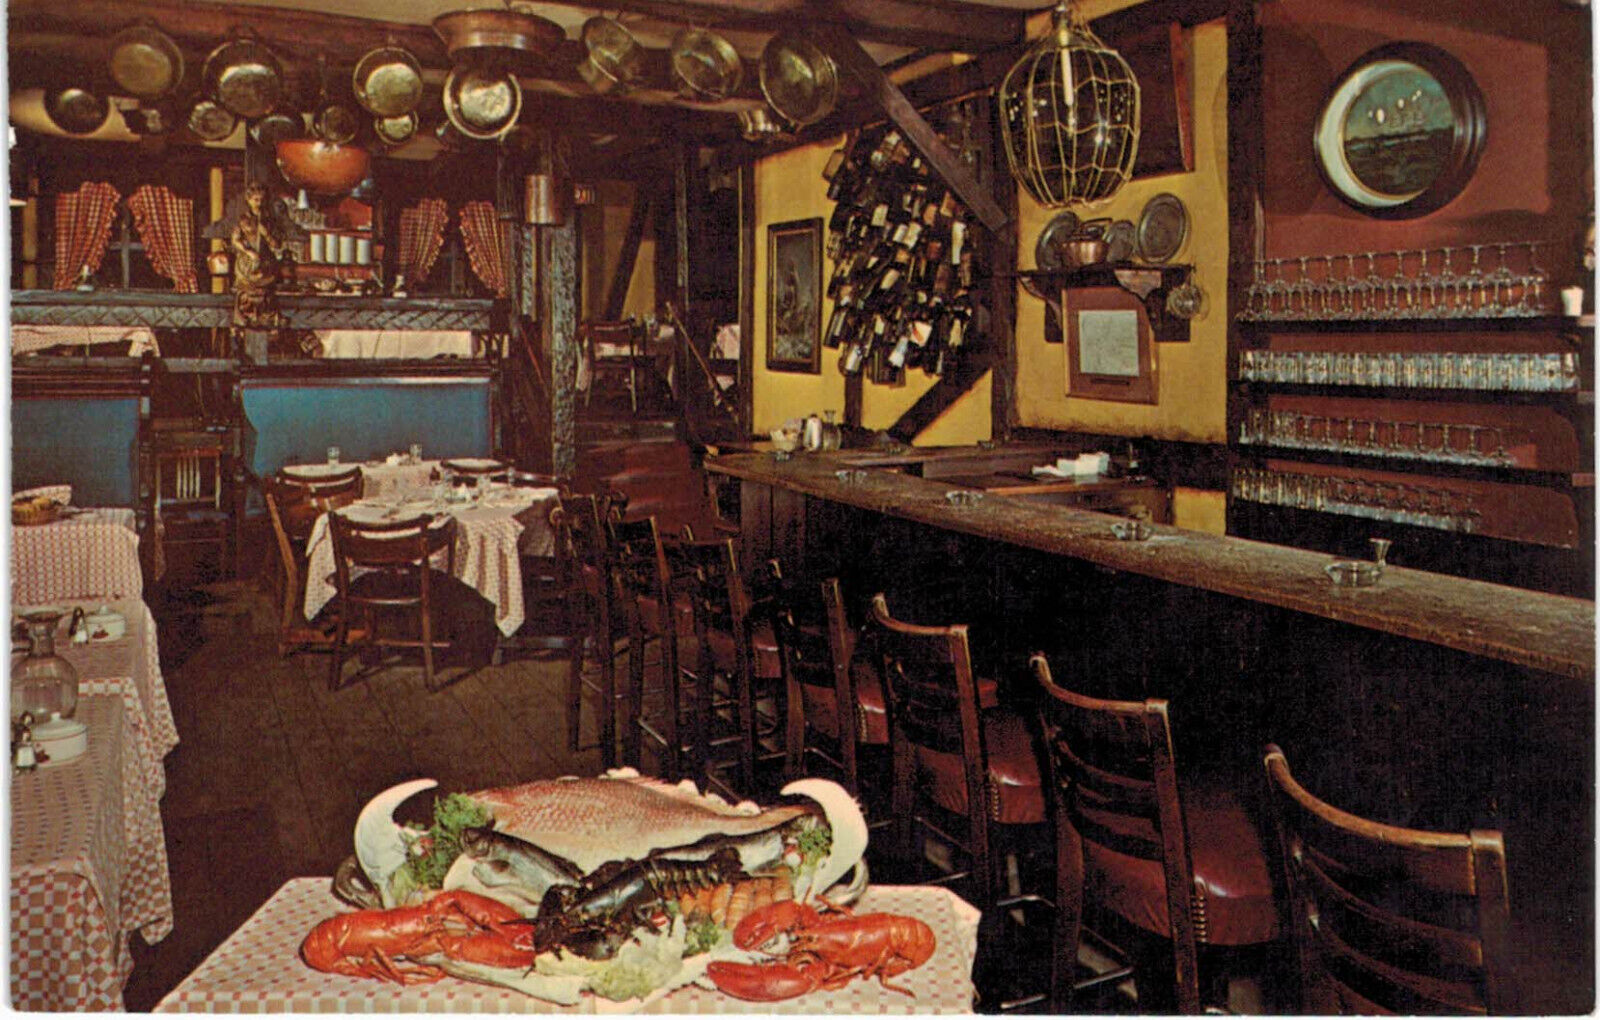 The Cape Cod Room at the Drake - Vintage c1960 Postcard - Chicago, Illinois